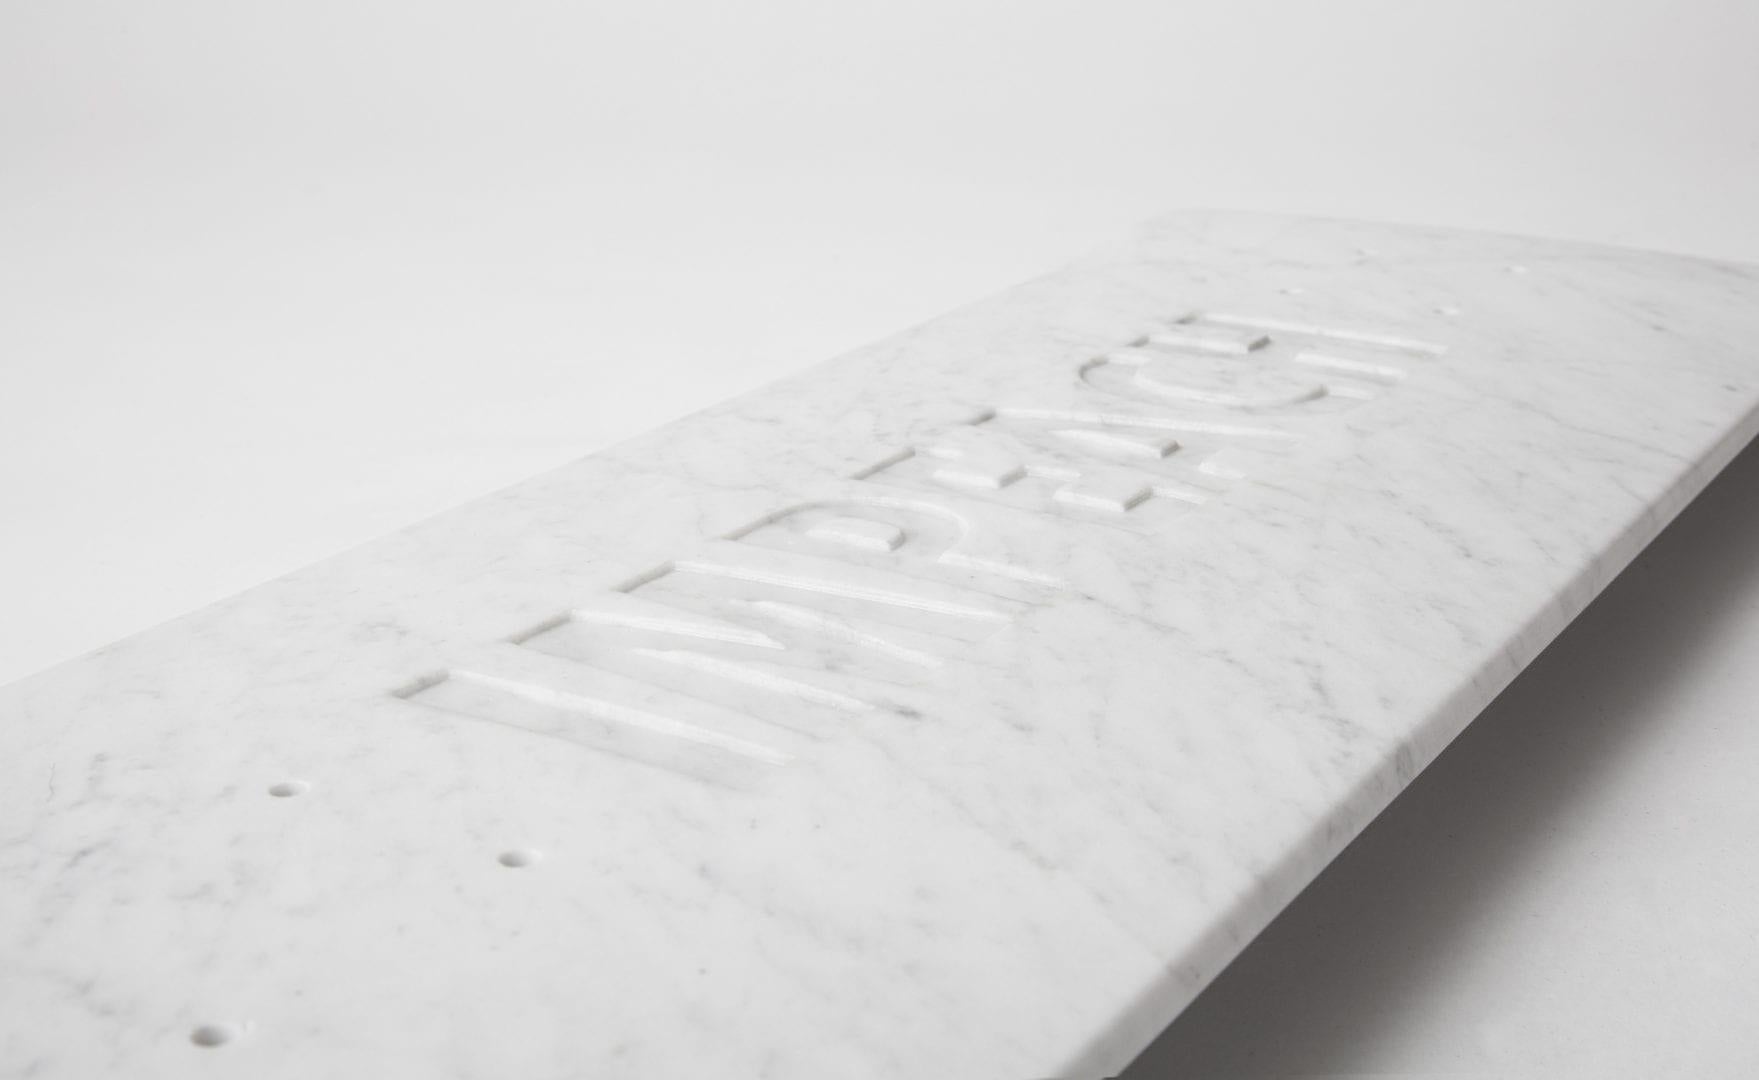 The Skateroom with Jenny Holzer
One skateboard deck
Solid marble with engraving
Measures: 31 H. x 8 inches
Mounting hardware included
Edition of 25
Top print includes printed signature of the artist
Hand-signed COA included

This skateboard